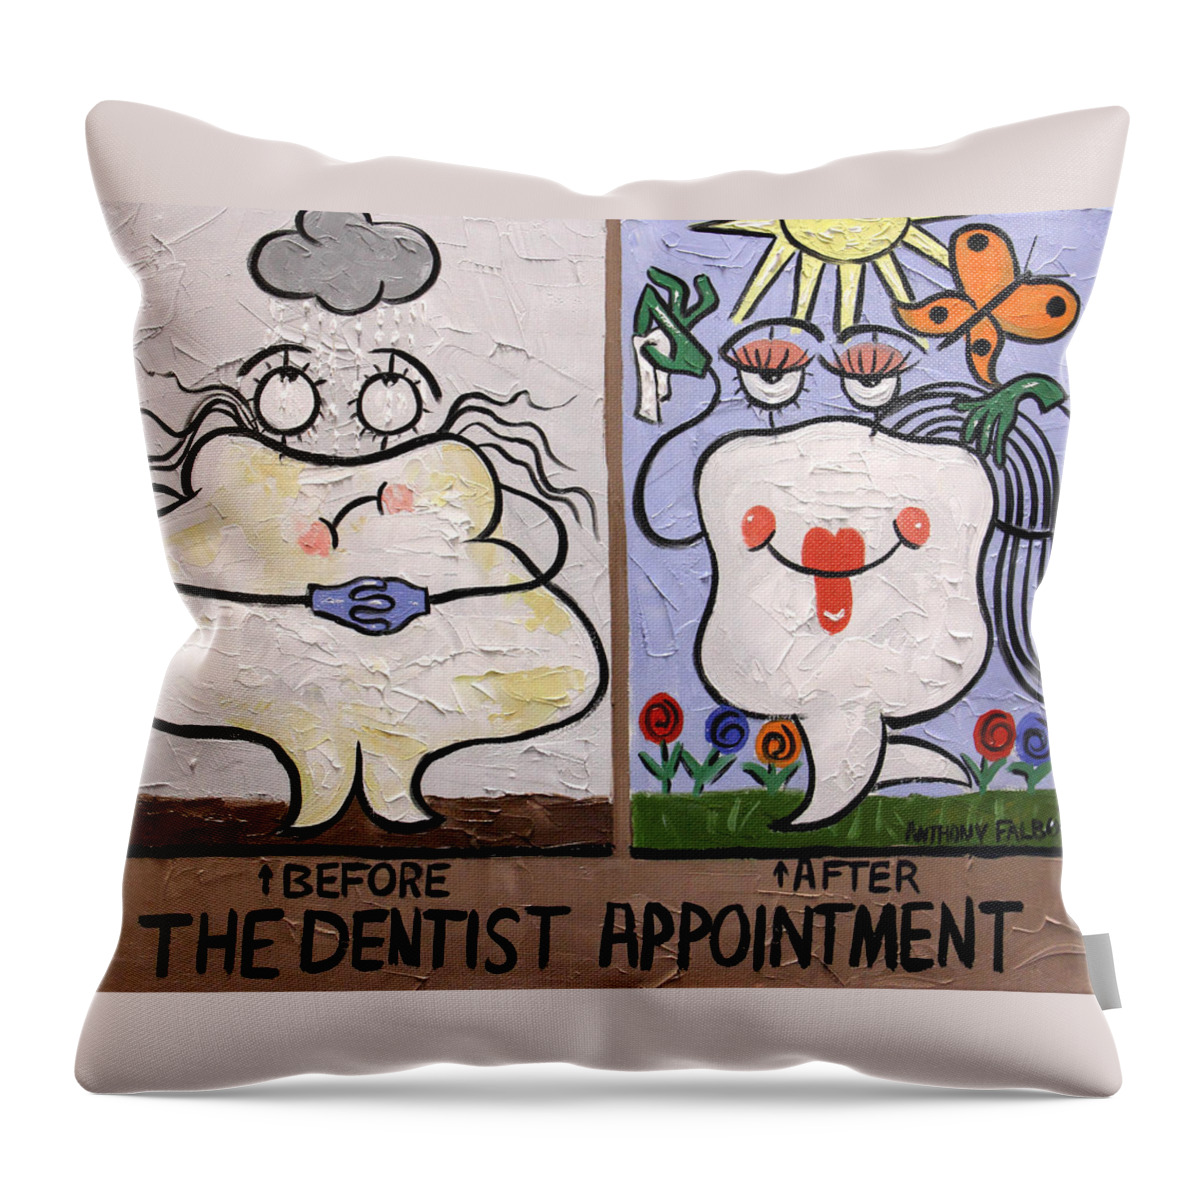 The Dentist Appointment Throw Pillow featuring the painting The Dentist Appointment Dental Art By Anthony Falbo by Anthony Falbo